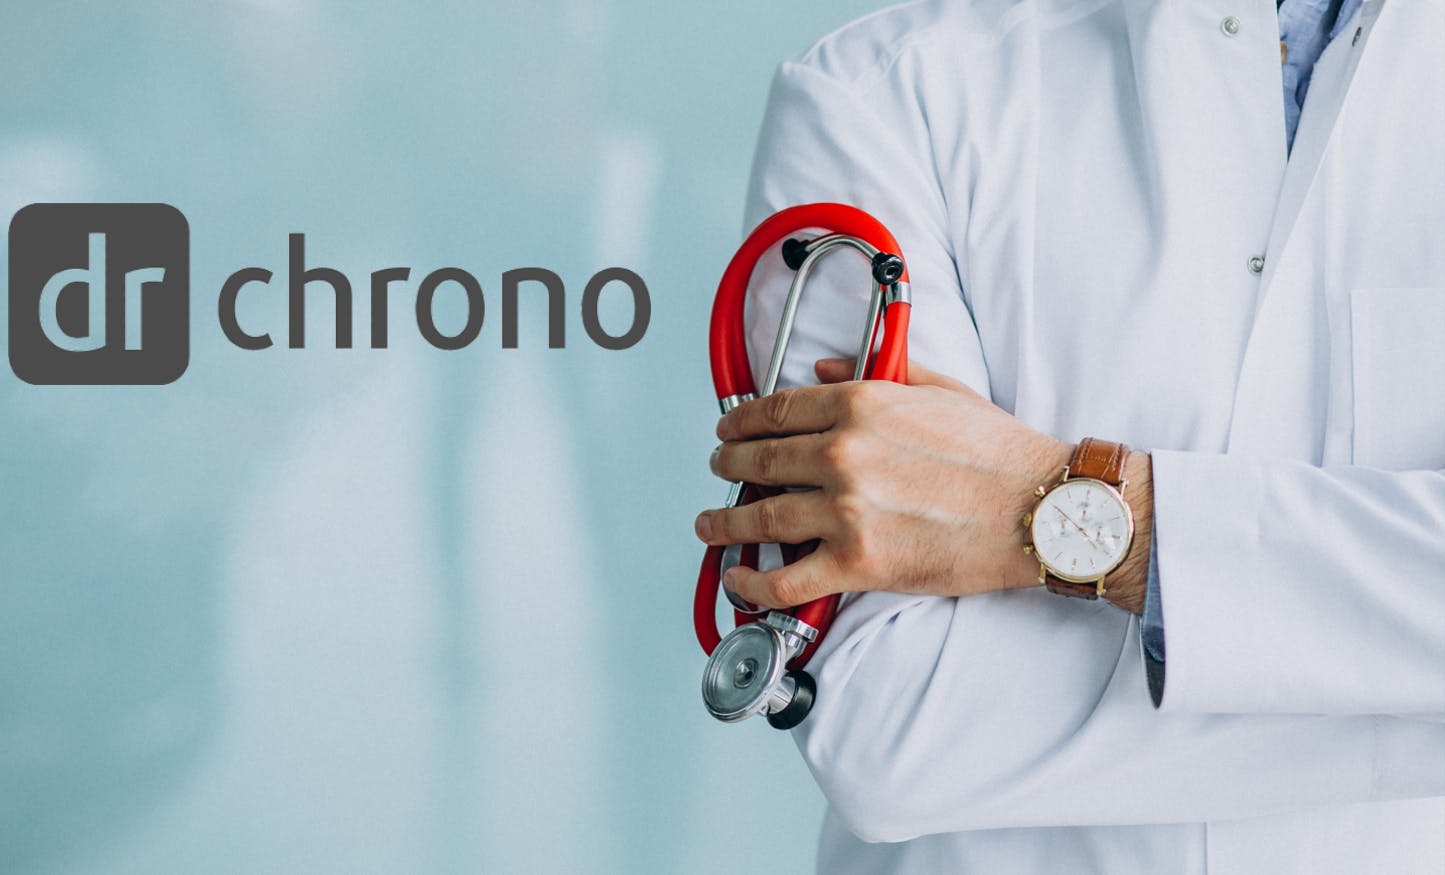 DrChrono: EHR Solutions, Services, and Prices